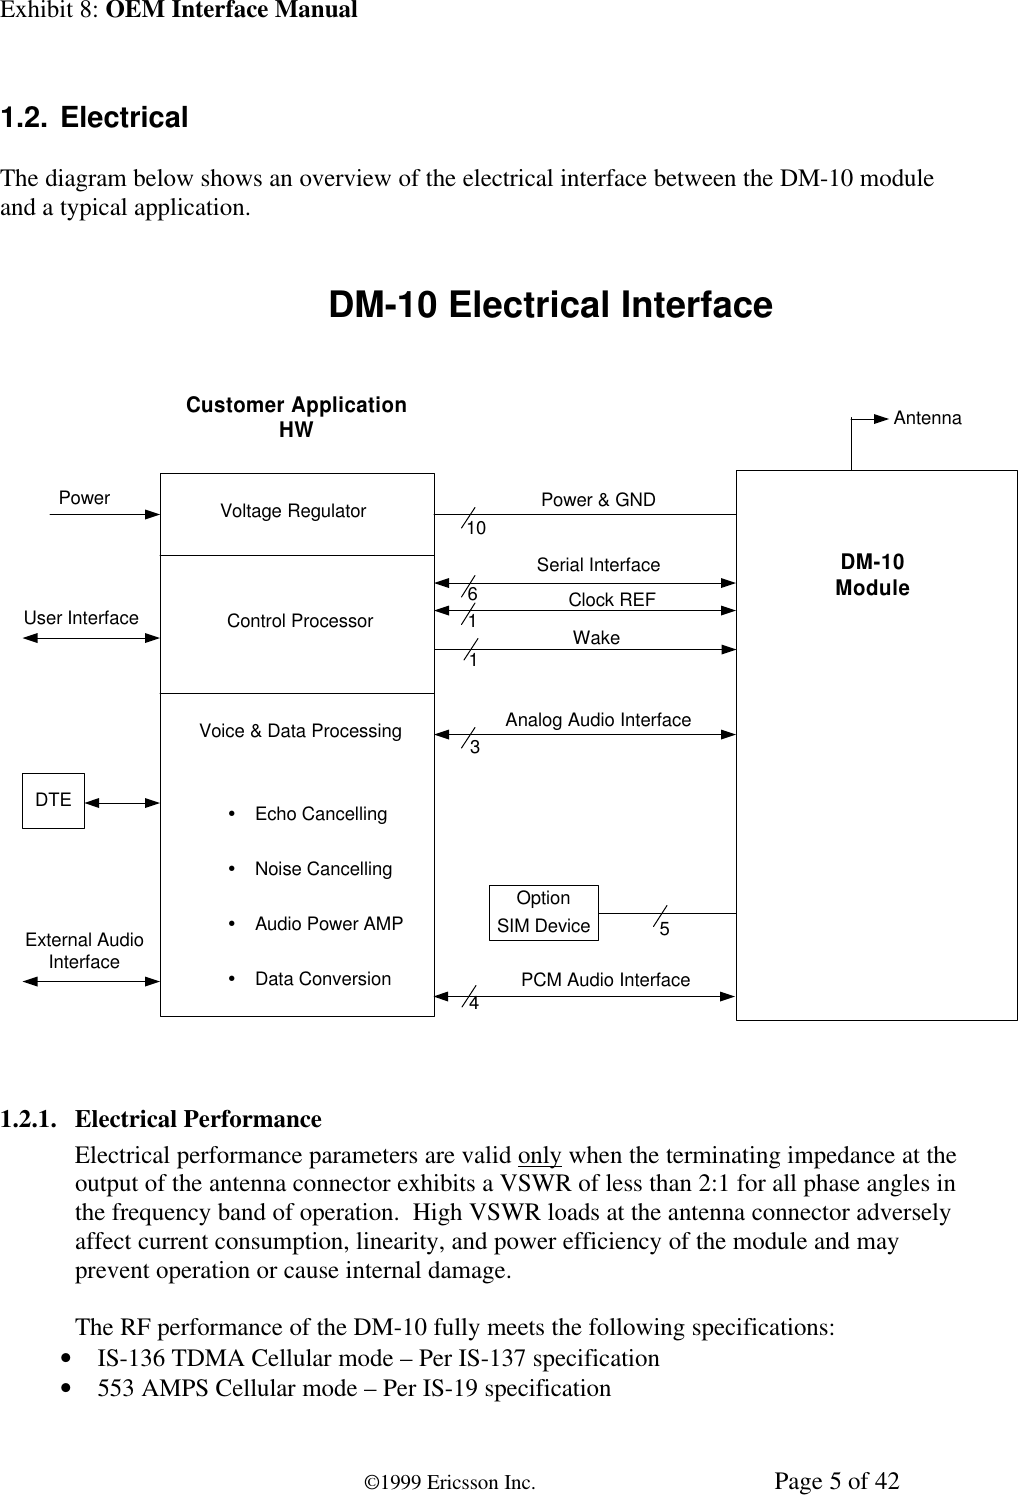 Exhibit 8: OEM Interface Manual©1999 Ericsson Inc. Page 5 of 421.2. ElectricalThe diagram below shows an overview of the electrical interface between the DM-10 moduleand a typical application.DM-10 Electrical InterfaceCustomer ApplicationHWVoltage RegulatorControl ProcessorVoice &amp; Data ProcessingŸEcho CancellingŸNoise CancellingŸAudio Power AMPŸData ConversionDTEPowerExternal AudioInterfaceAntennaUser Interface61Power &amp; GNDSerial InterfaceWakeAnalog Audio Interface101354Clock REFOptionSIM DeviceDM-10ModulePCM Audio Interface1.2.1. Electrical PerformanceElectrical performance parameters are valid only when the terminating impedance at theoutput of the antenna connector exhibits a VSWR of less than 2:1 for all phase angles inthe frequency band of operation.  High VSWR loads at the antenna connector adverselyaffect current consumption, linearity, and power efficiency of the module and mayprevent operation or cause internal damage.The RF performance of the DM-10 fully meets the following specifications:• IS-136 TDMA Cellular mode – Per IS-137 specification• 553 AMPS Cellular mode – Per IS-19 specification